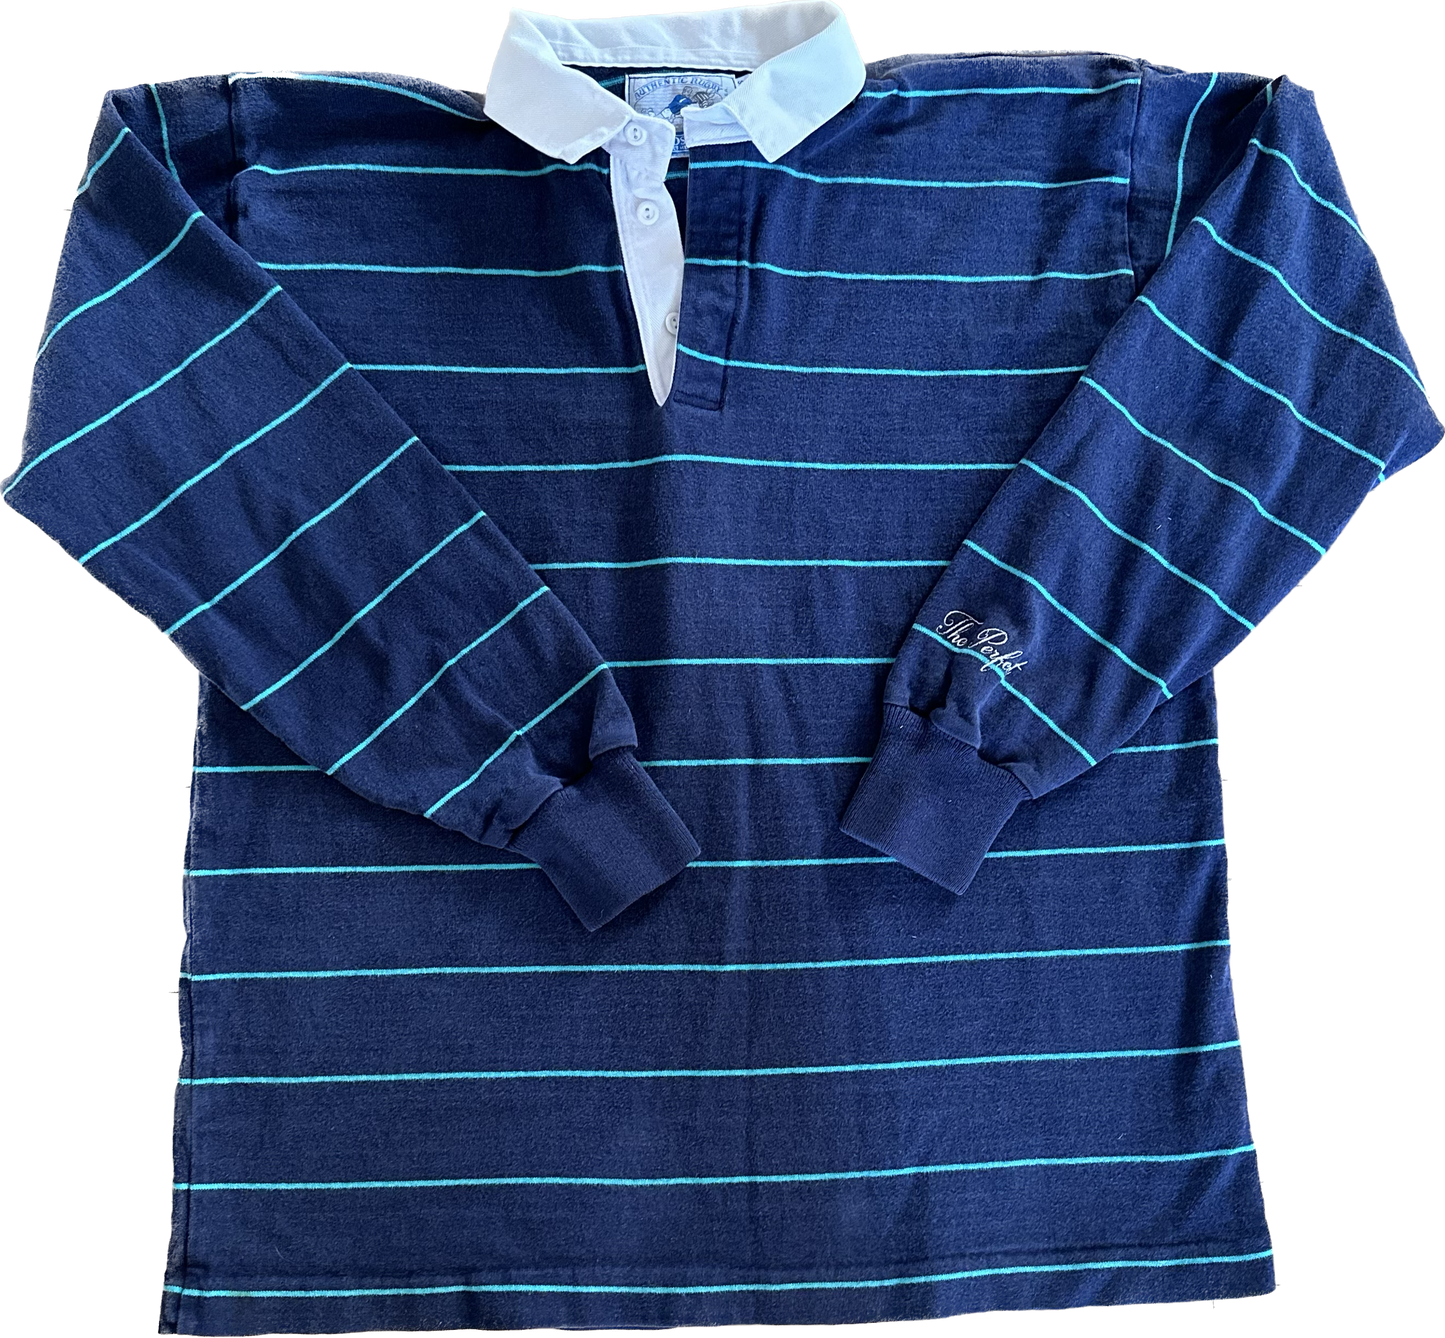 The Perfect Vintage Indigo Rugby Shirt